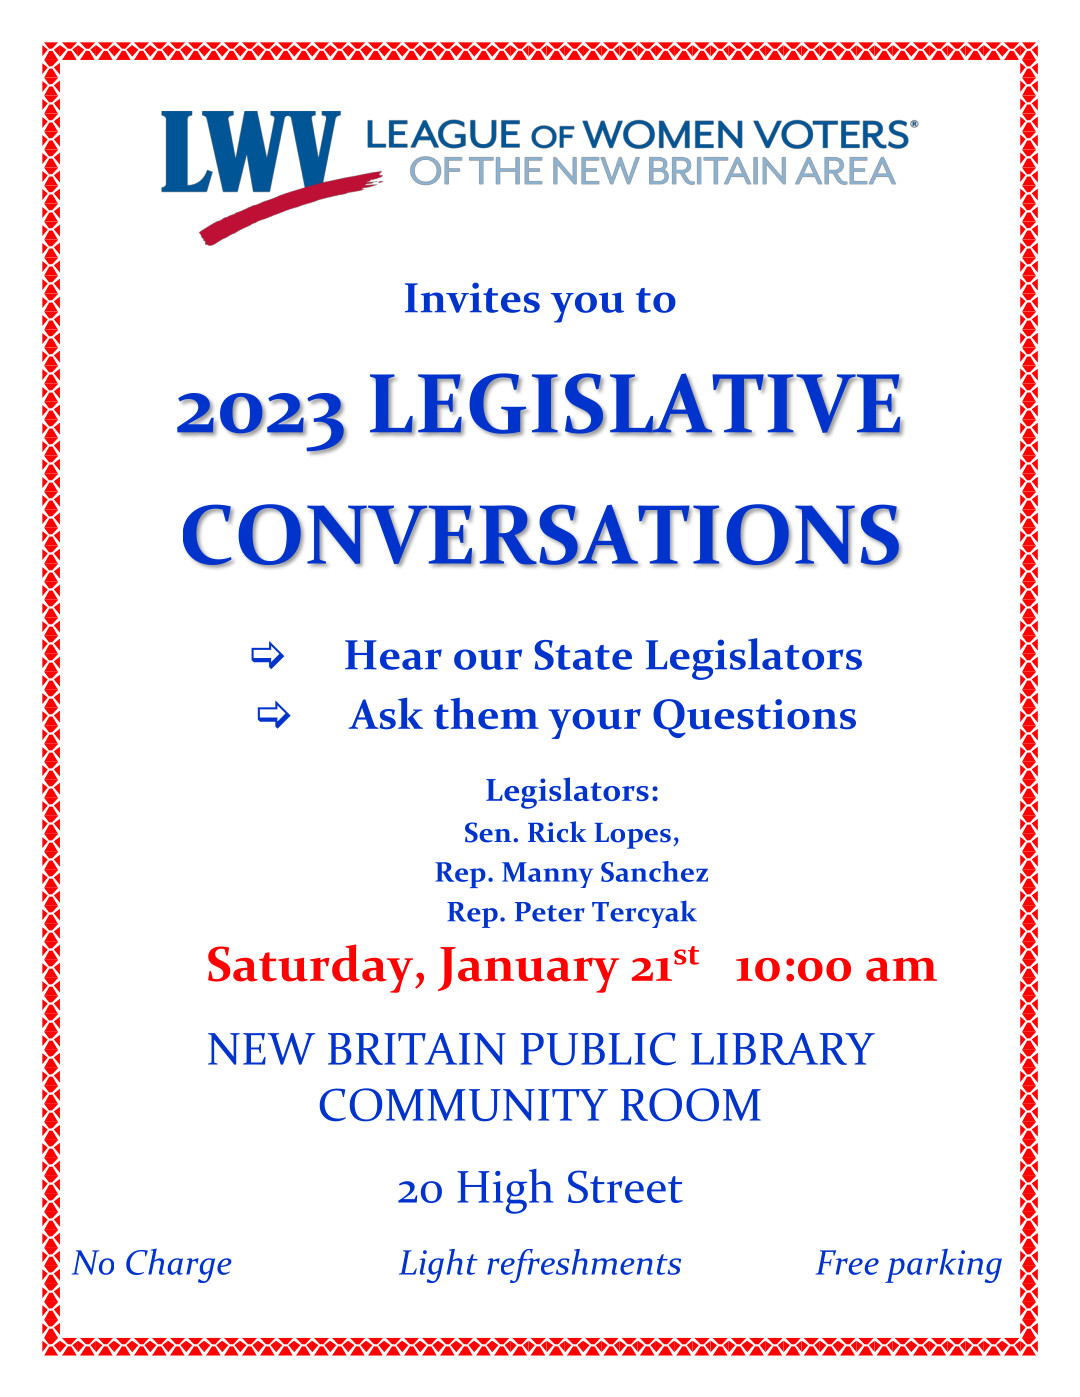 Lawmakers Will Discuss Legislative Issues, Priorities For 2023 Session